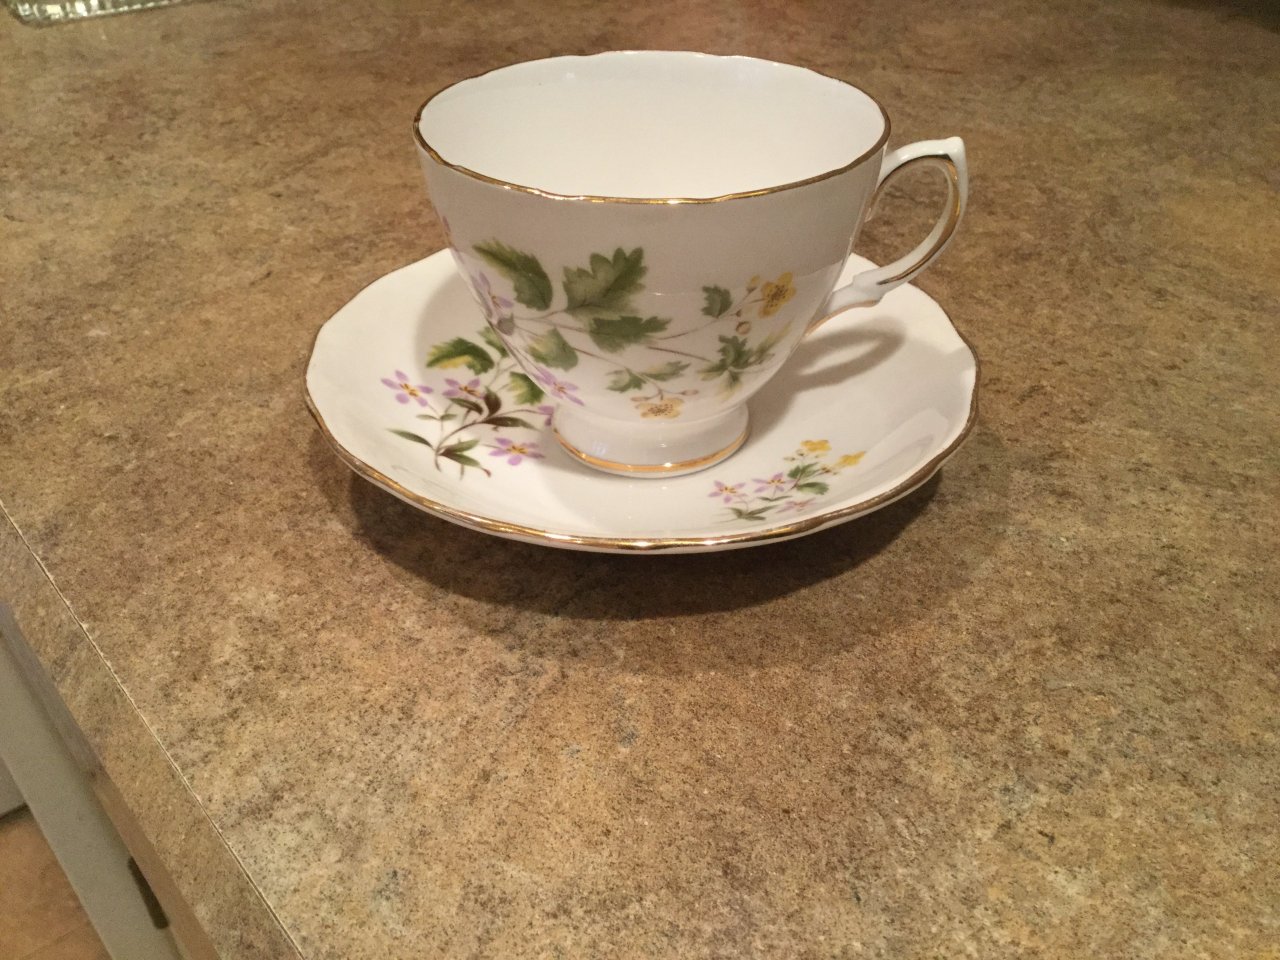 I Have A Tea Cup And Saucer: Crown Royal, Bone China, England H 46 9